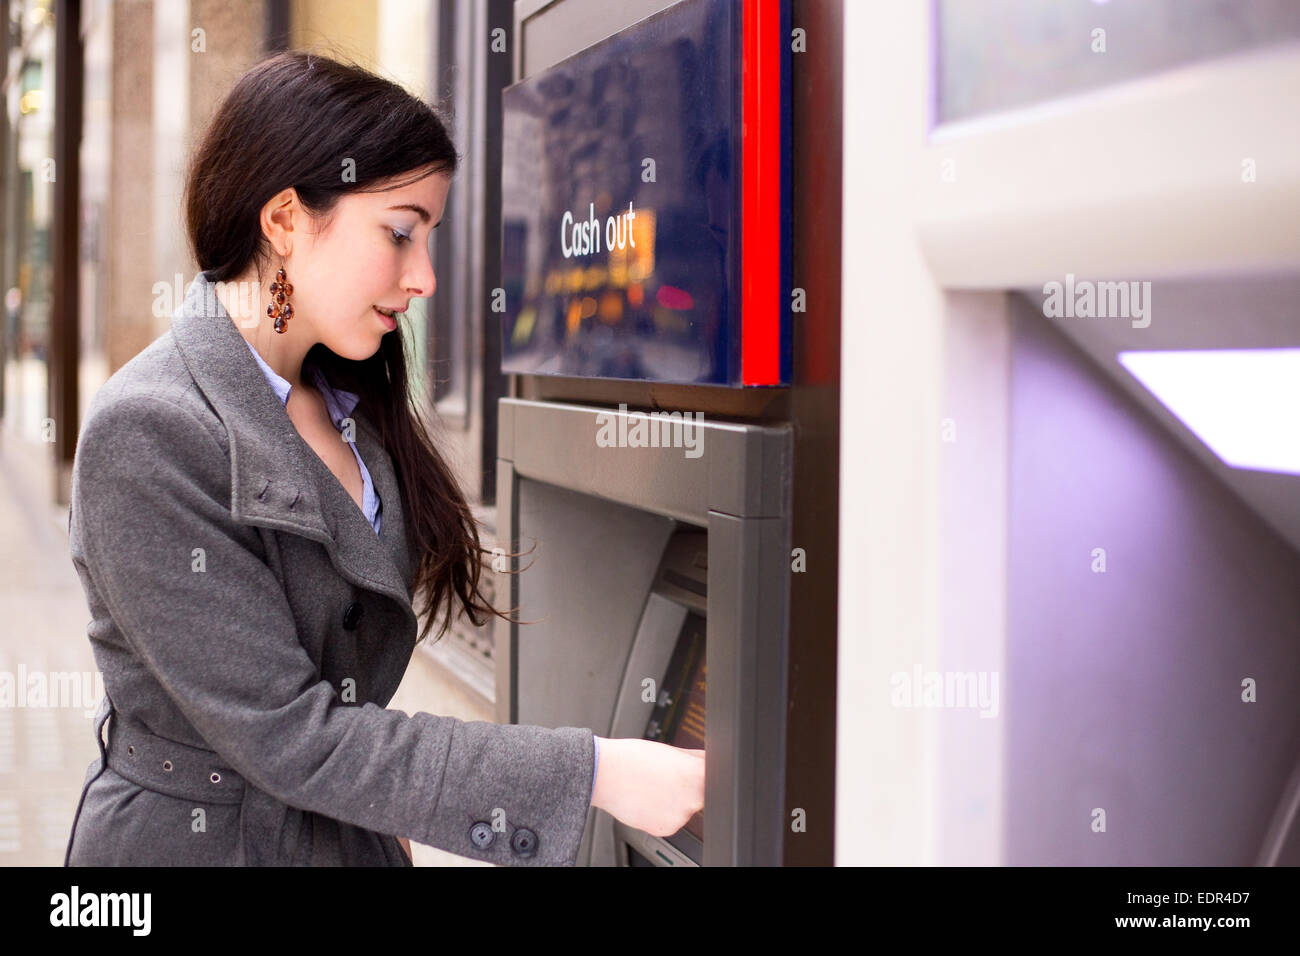 young woman withdrawing cash at the atm. Stock Photo